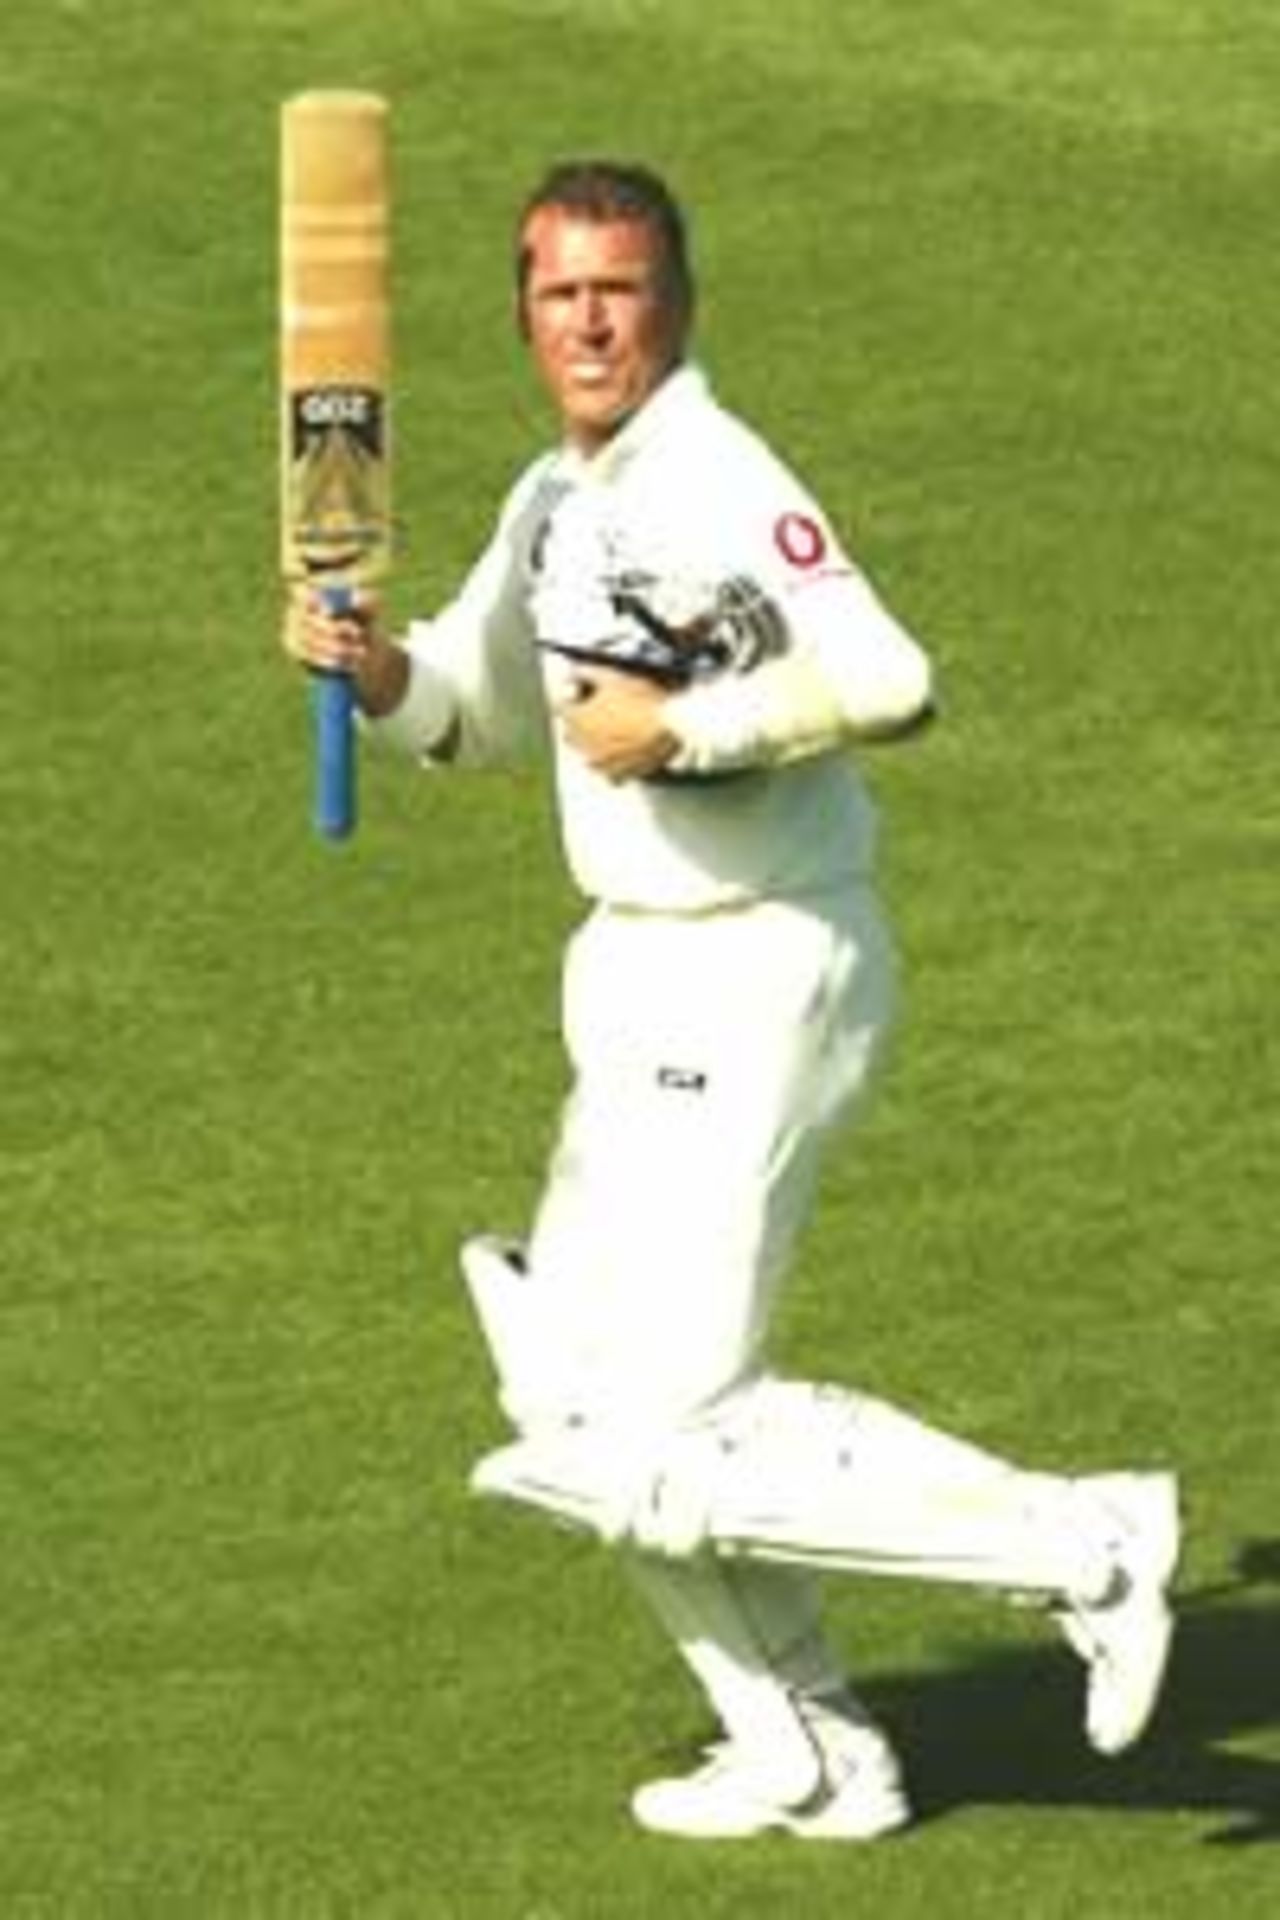 SYDNEY - JANUARY 5: Alex Stewart of England leaves the field after the England innings during the fourth day of the fifth Ashes Test between Australia and England at the Sydney Cricket Ground in Sydney, Australia on January 5, 2003.